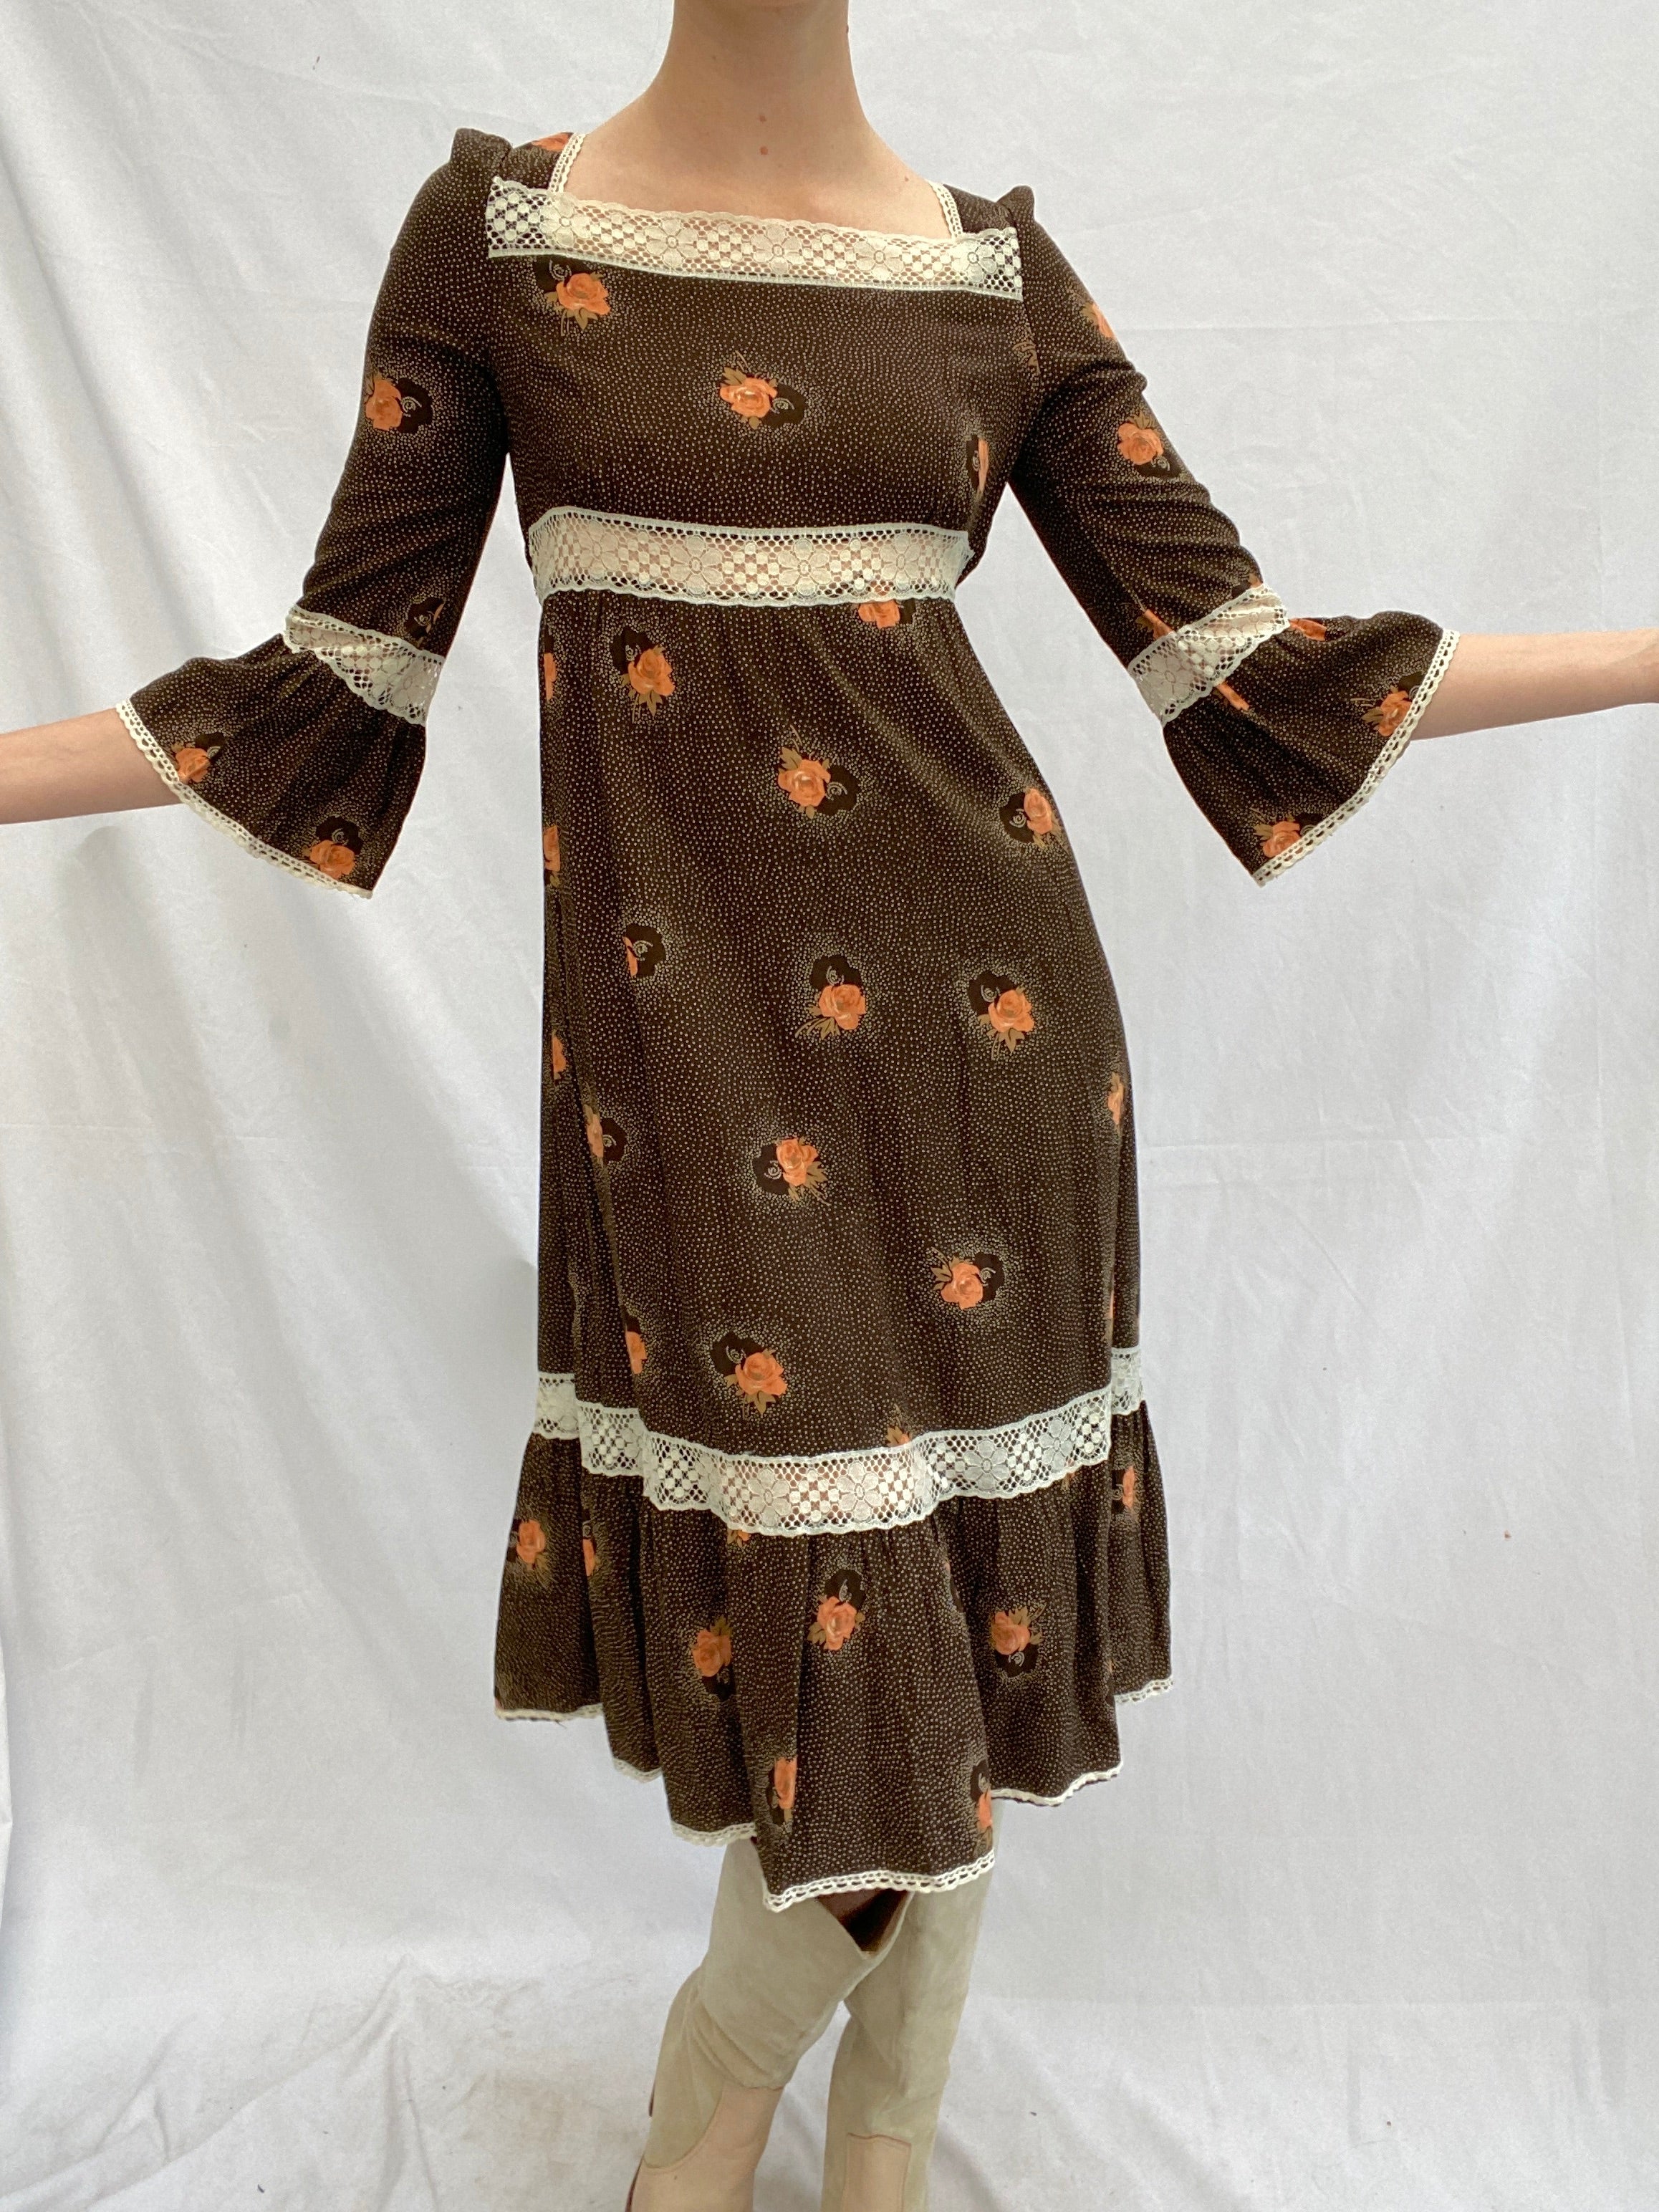 Long Sleeve Brown Floral Dress with White Lace